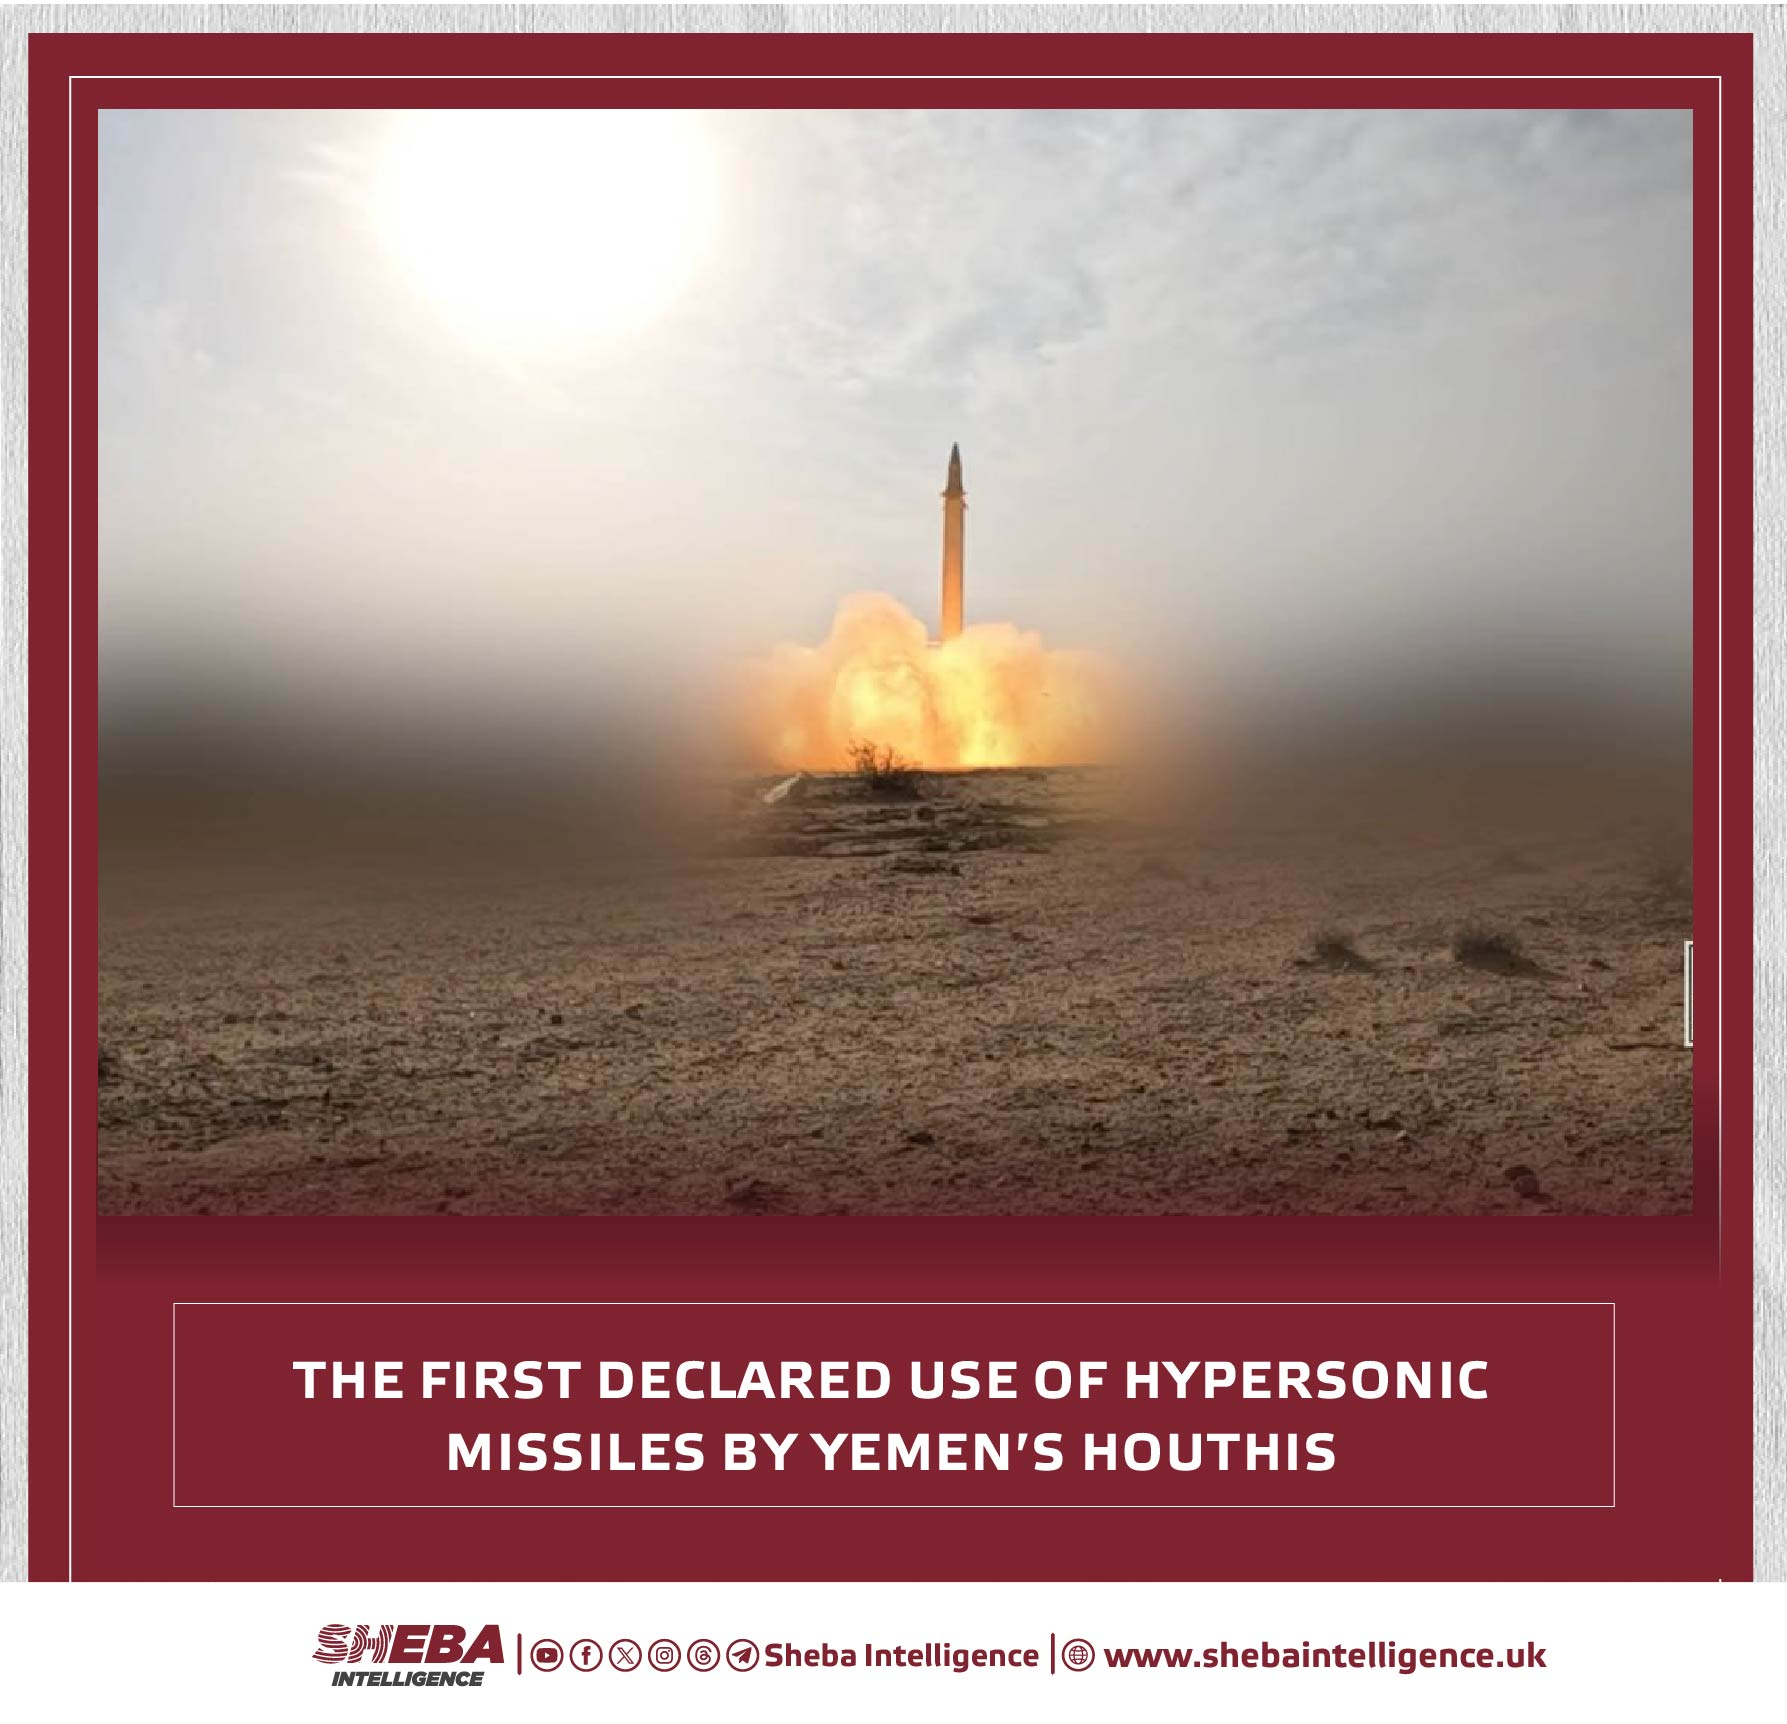 The First Declared Use of Hypersonic Missiles by Yemen's Houthis